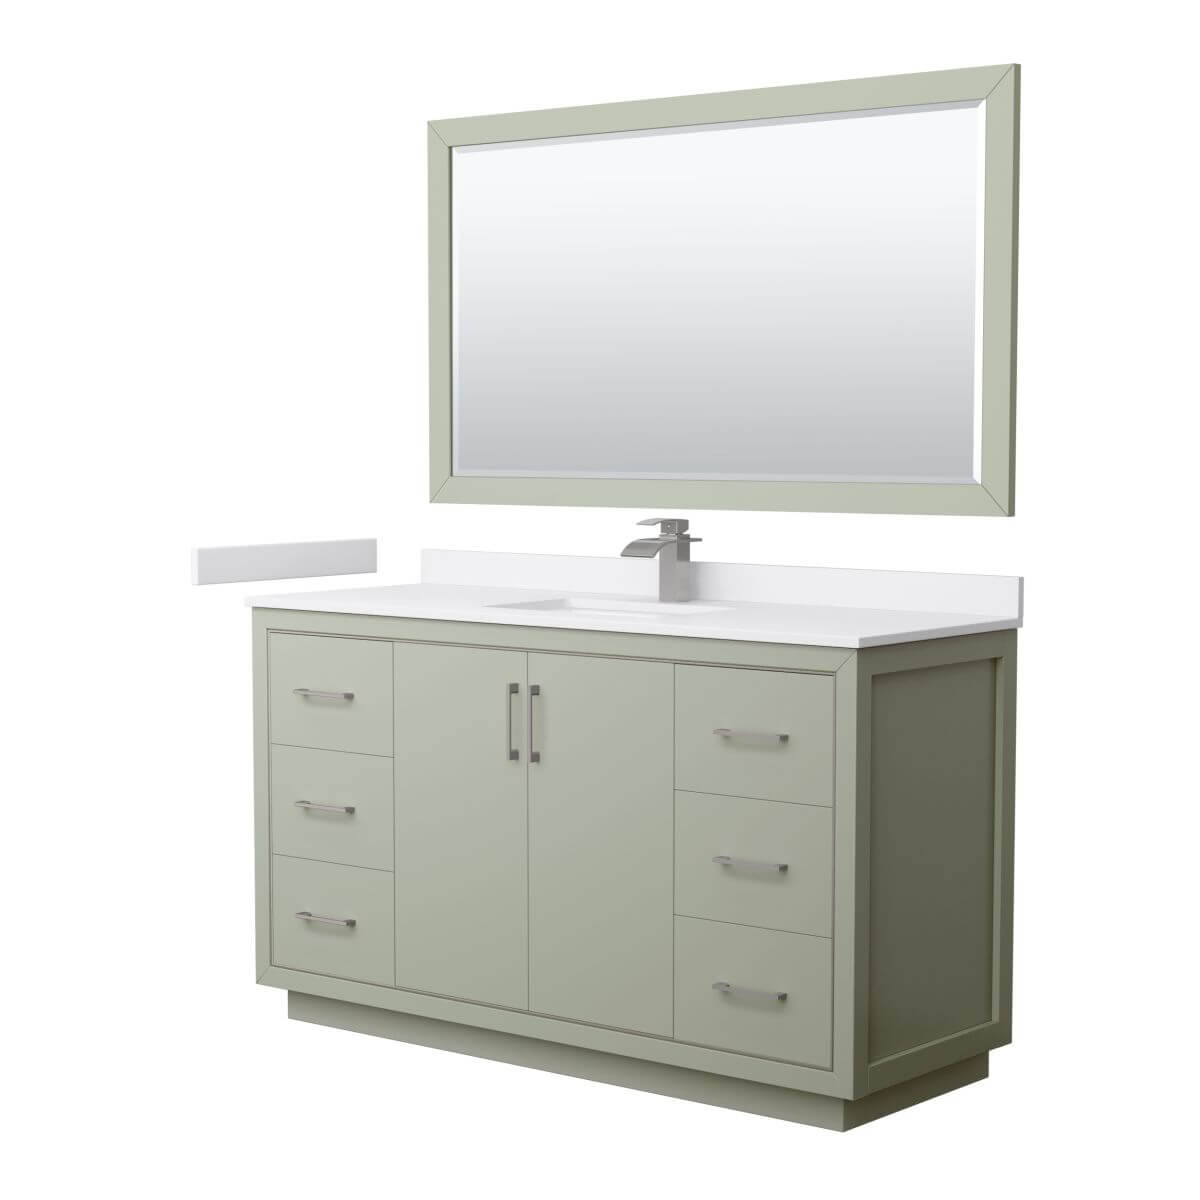 Wyndham Collection WCF111160SLGWCUNSM58 Icon 60 inch Single Bathroom Vanity in Light Green with White Cultured Marble Countertop, Undermount Square Sink, Brushed Nickel Trim and 58 Inch Mirror